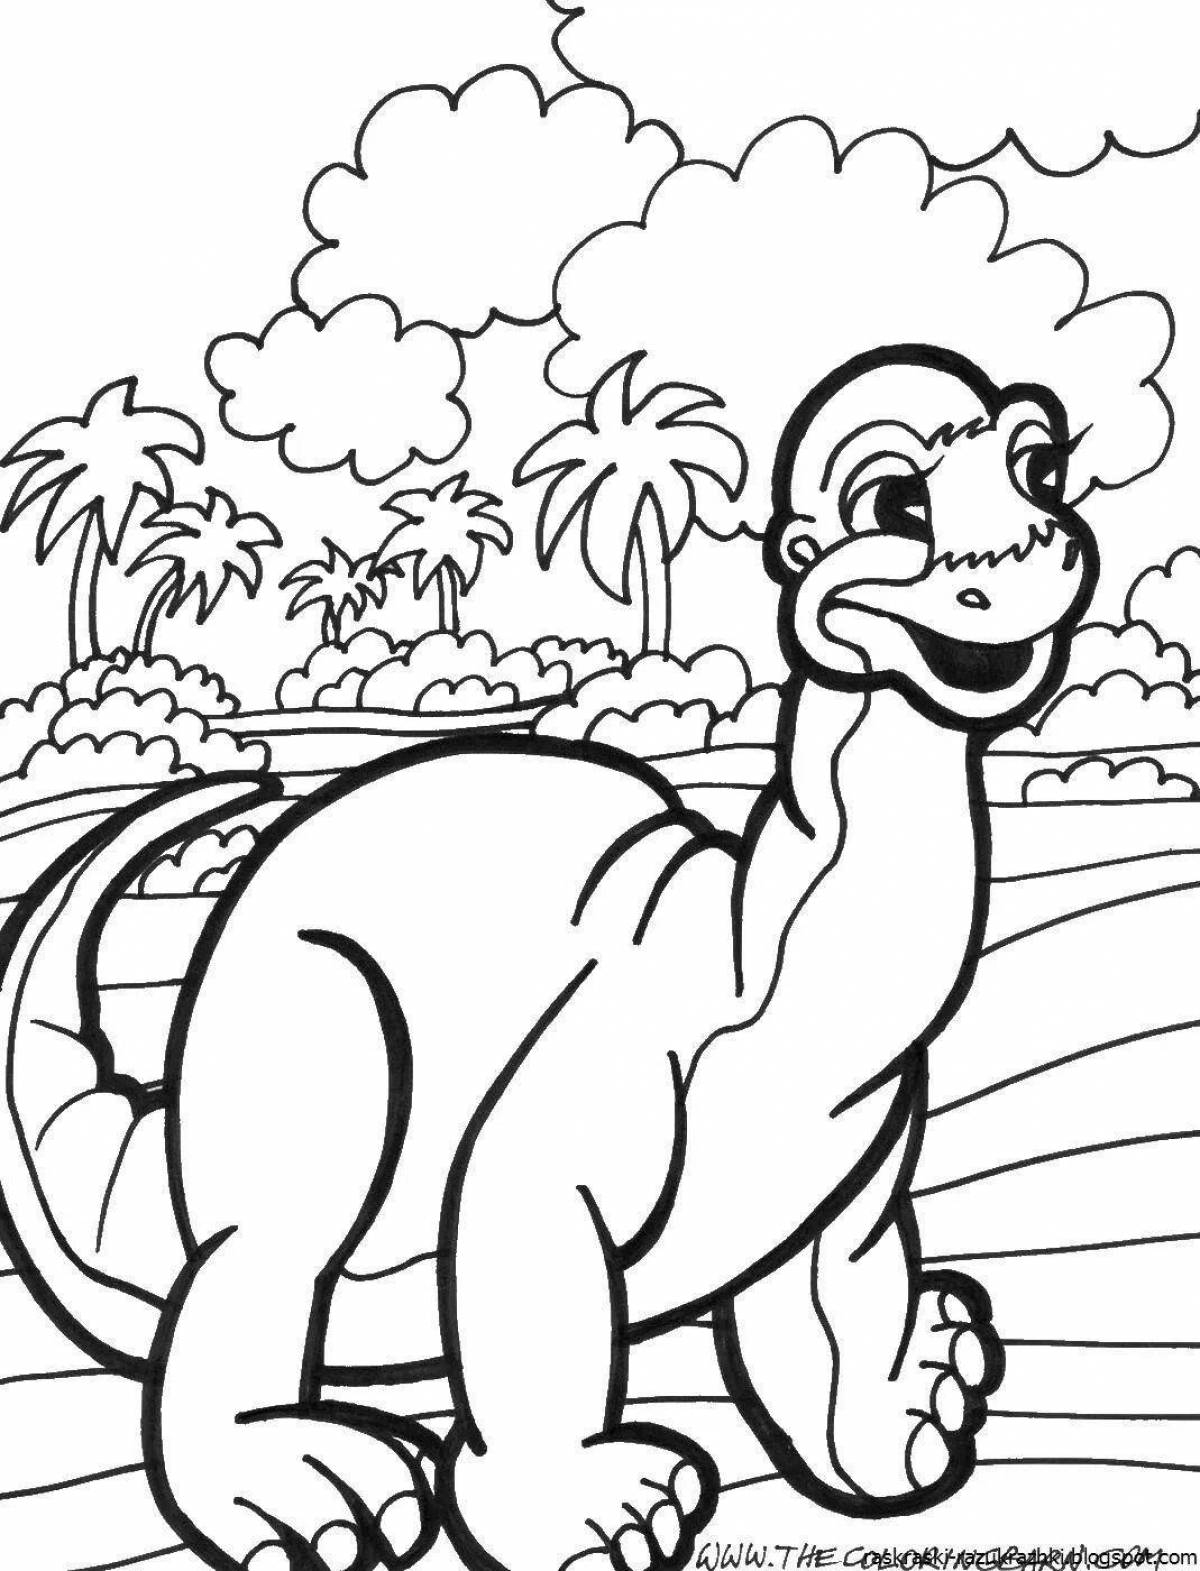 Wonderful dinosaurs coloring for children 6-7 years old